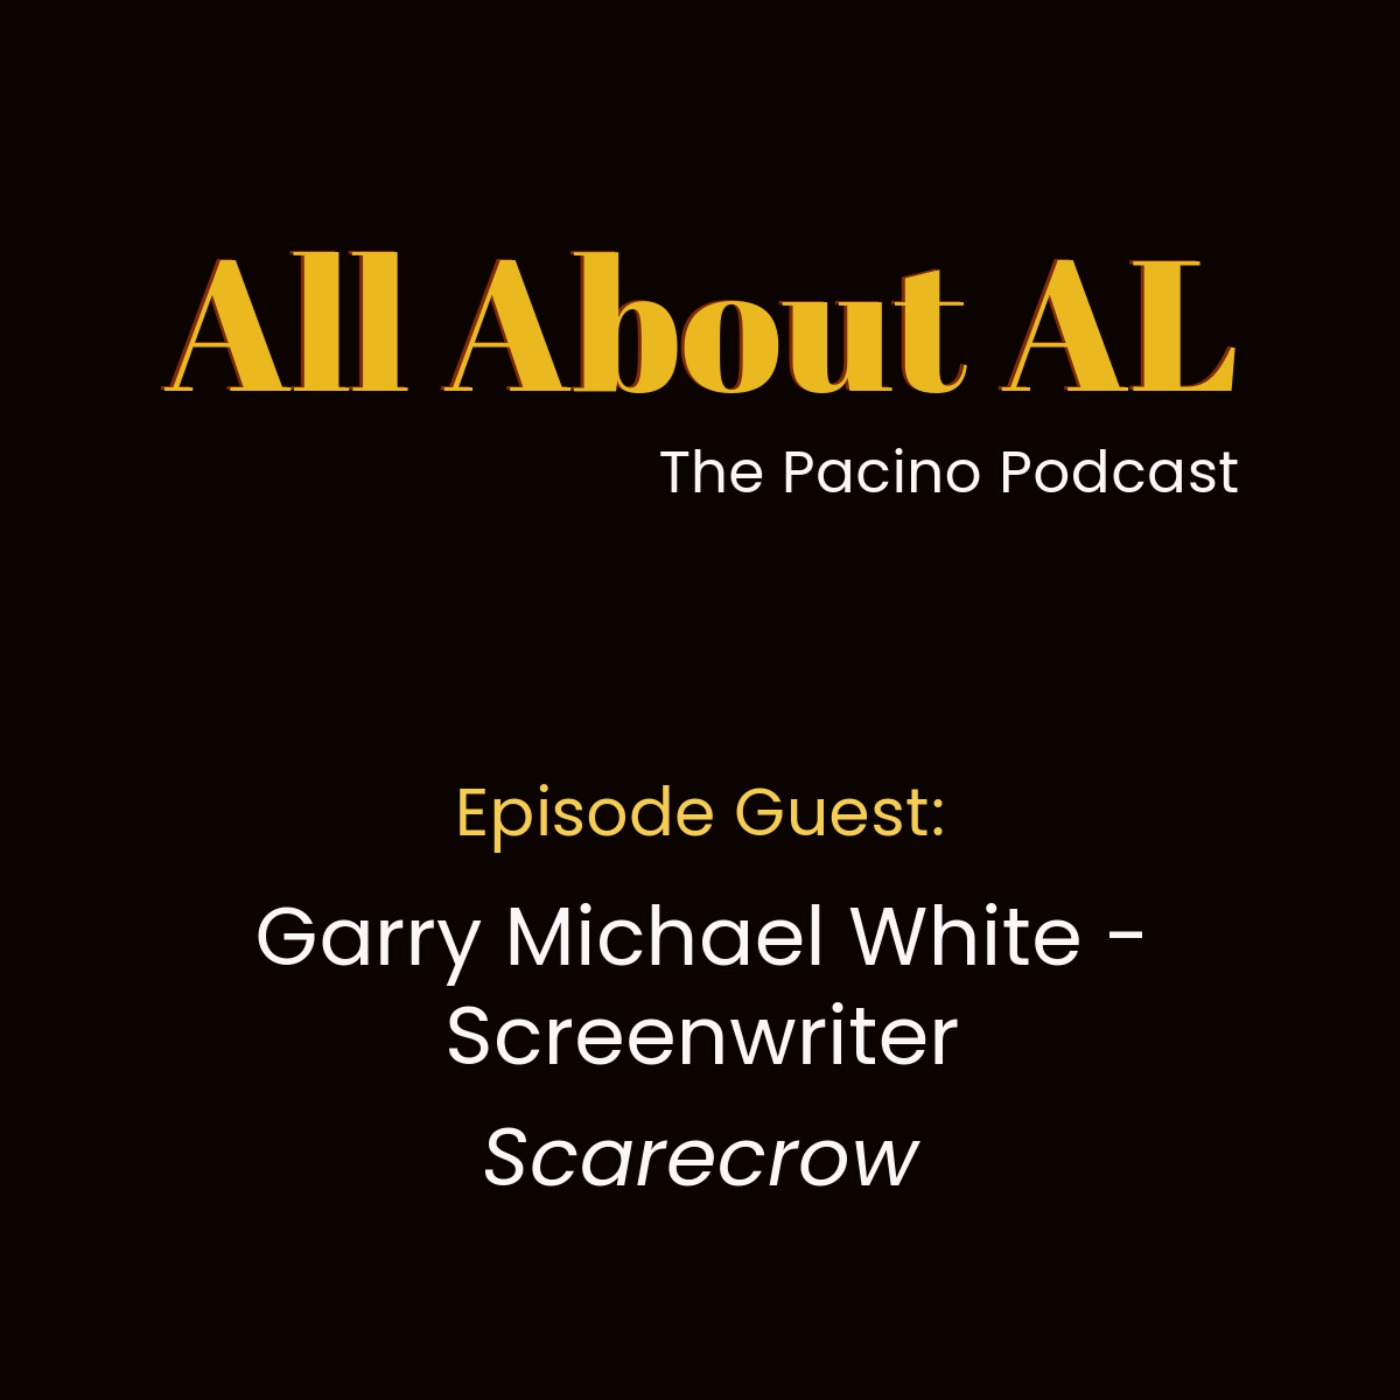 Episode 10: Scarecrow with Garry Michael White